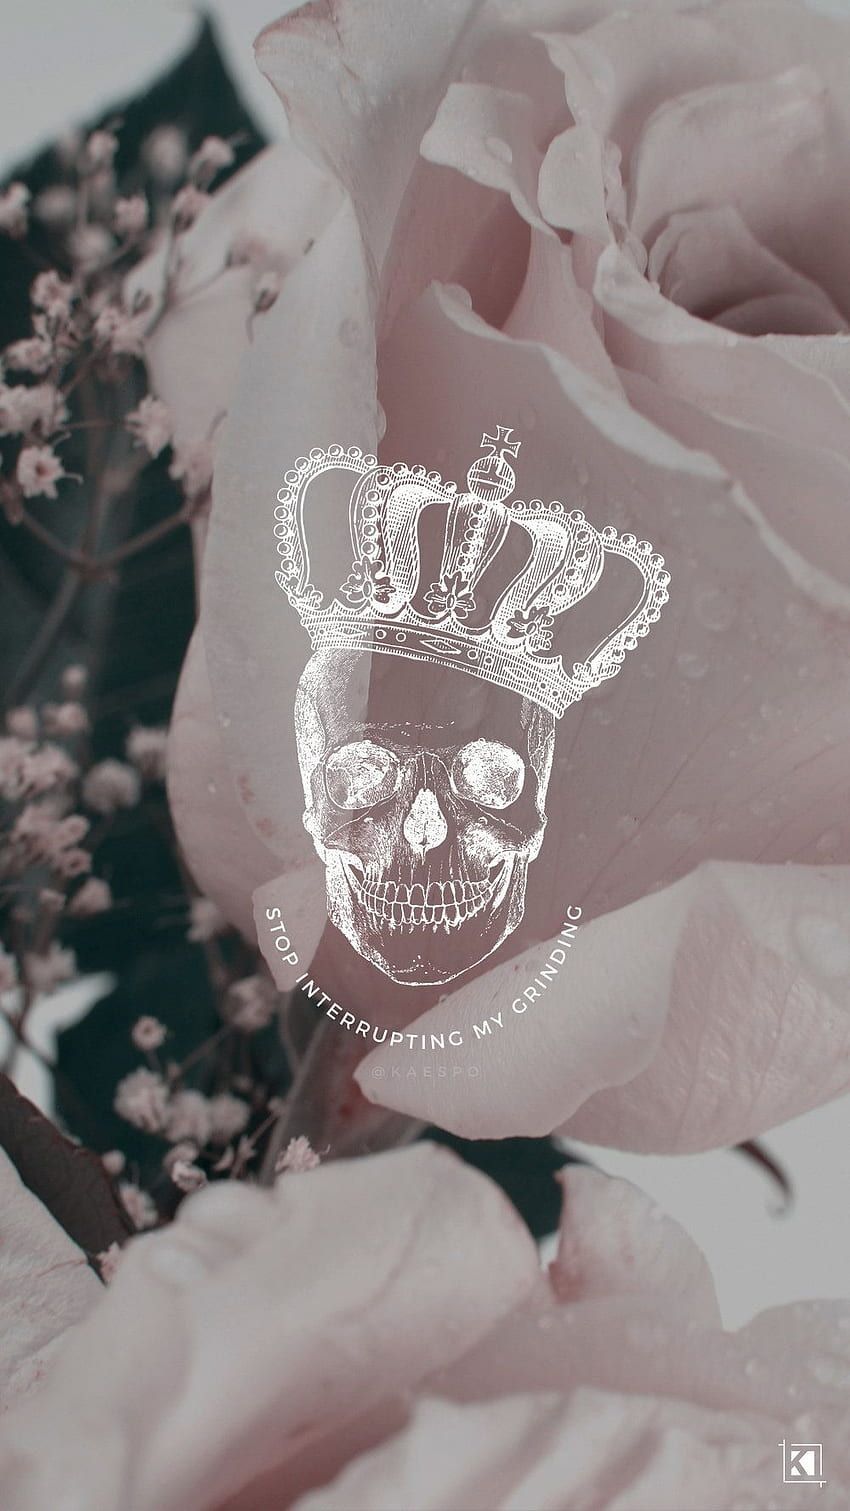 A skull wearing a crown is seen in the middle of the image. - Beyonce